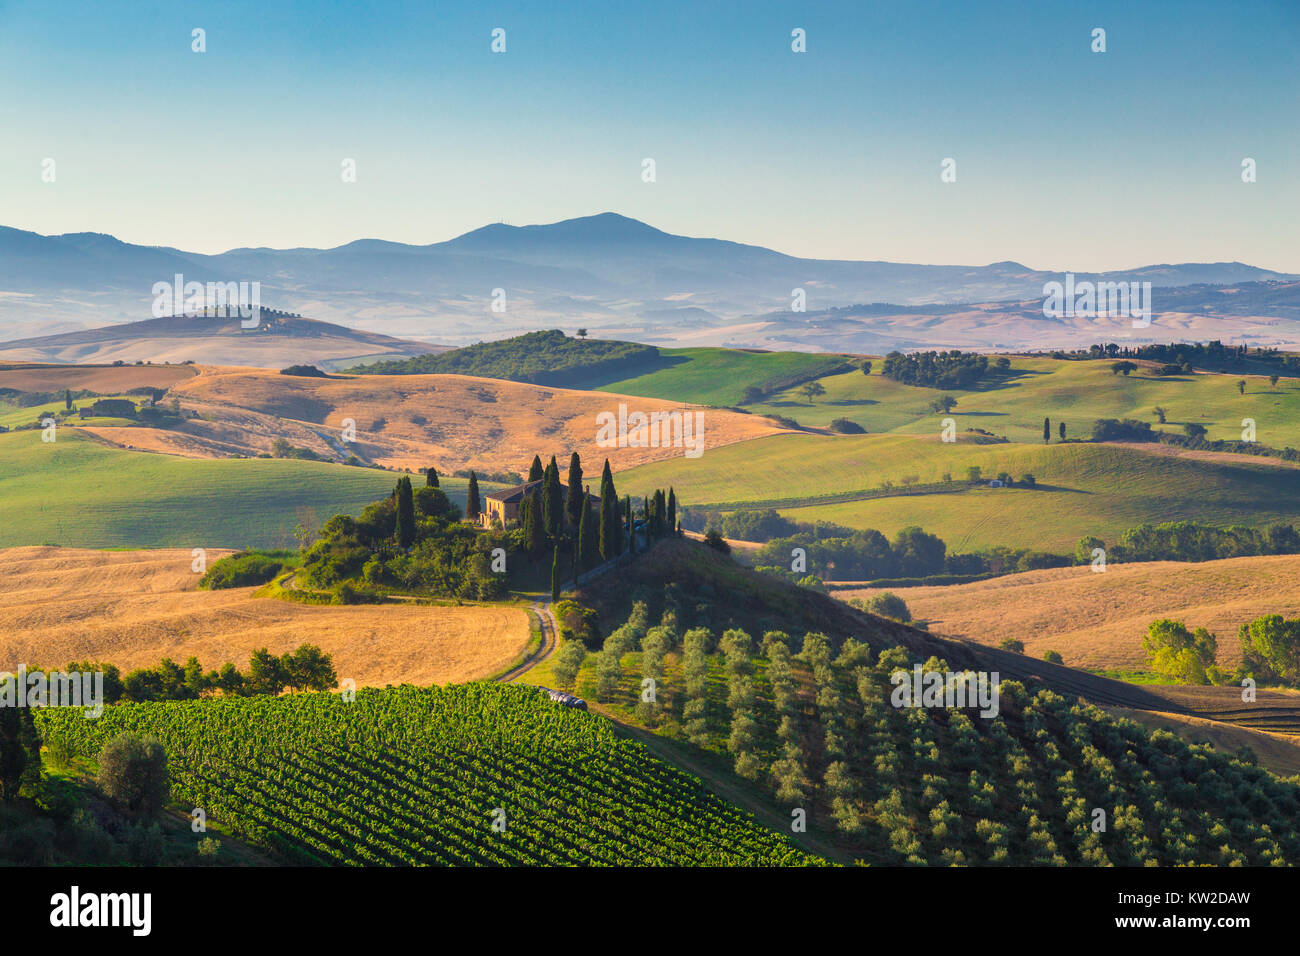 Classic view of scenic Tuscany landscape with famous farmhouse amidst idyllic rolling hills and valleys in beautiful golden morning light at sunrise i Stock Photo